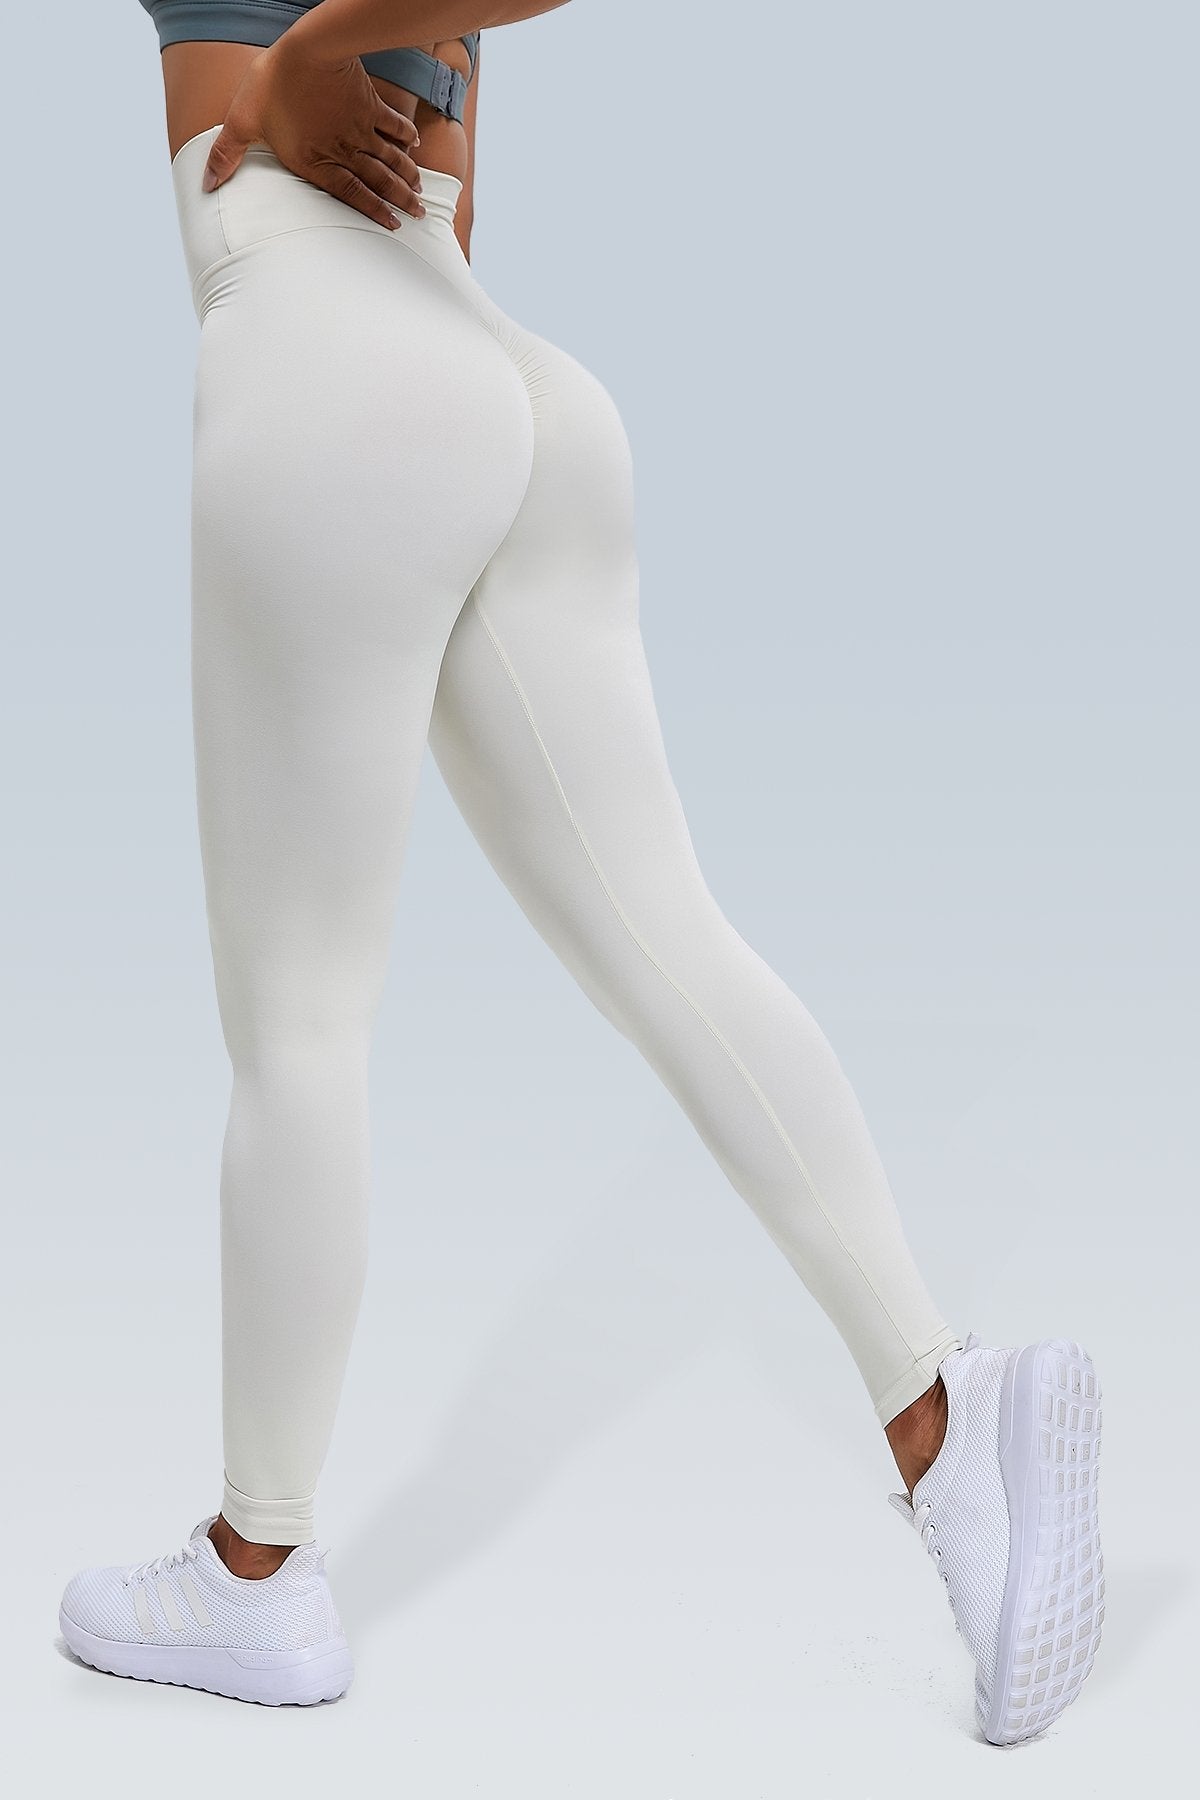 HMS Fit: White Gray Gradient Padded Racerback Leggings Two Piece